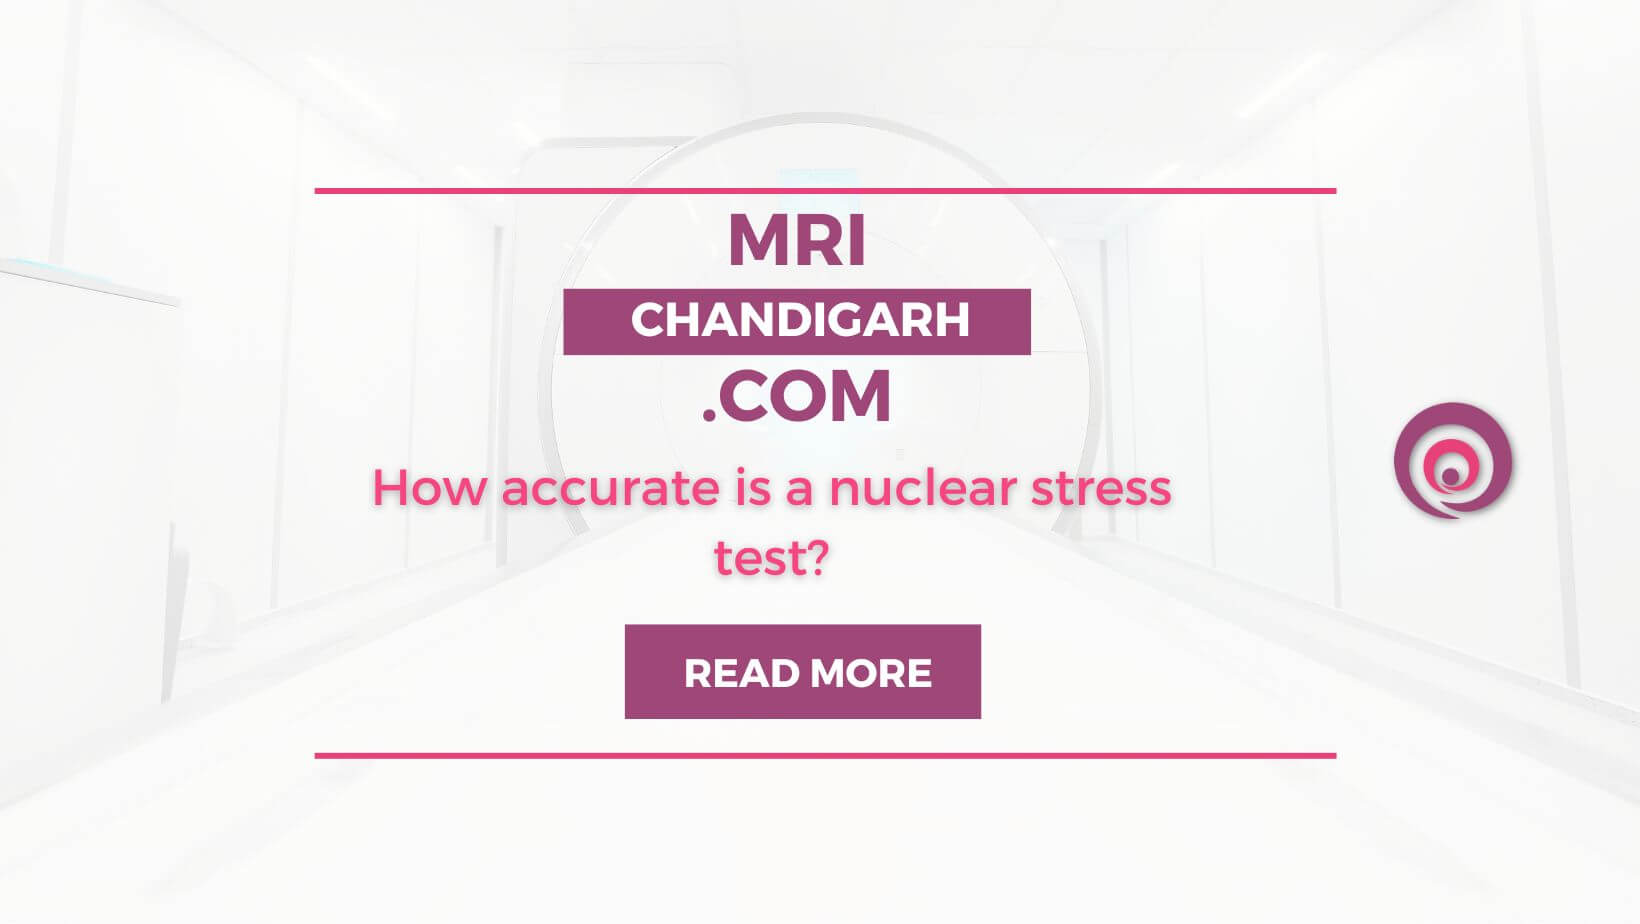 How accurate is a nuclear stress test?